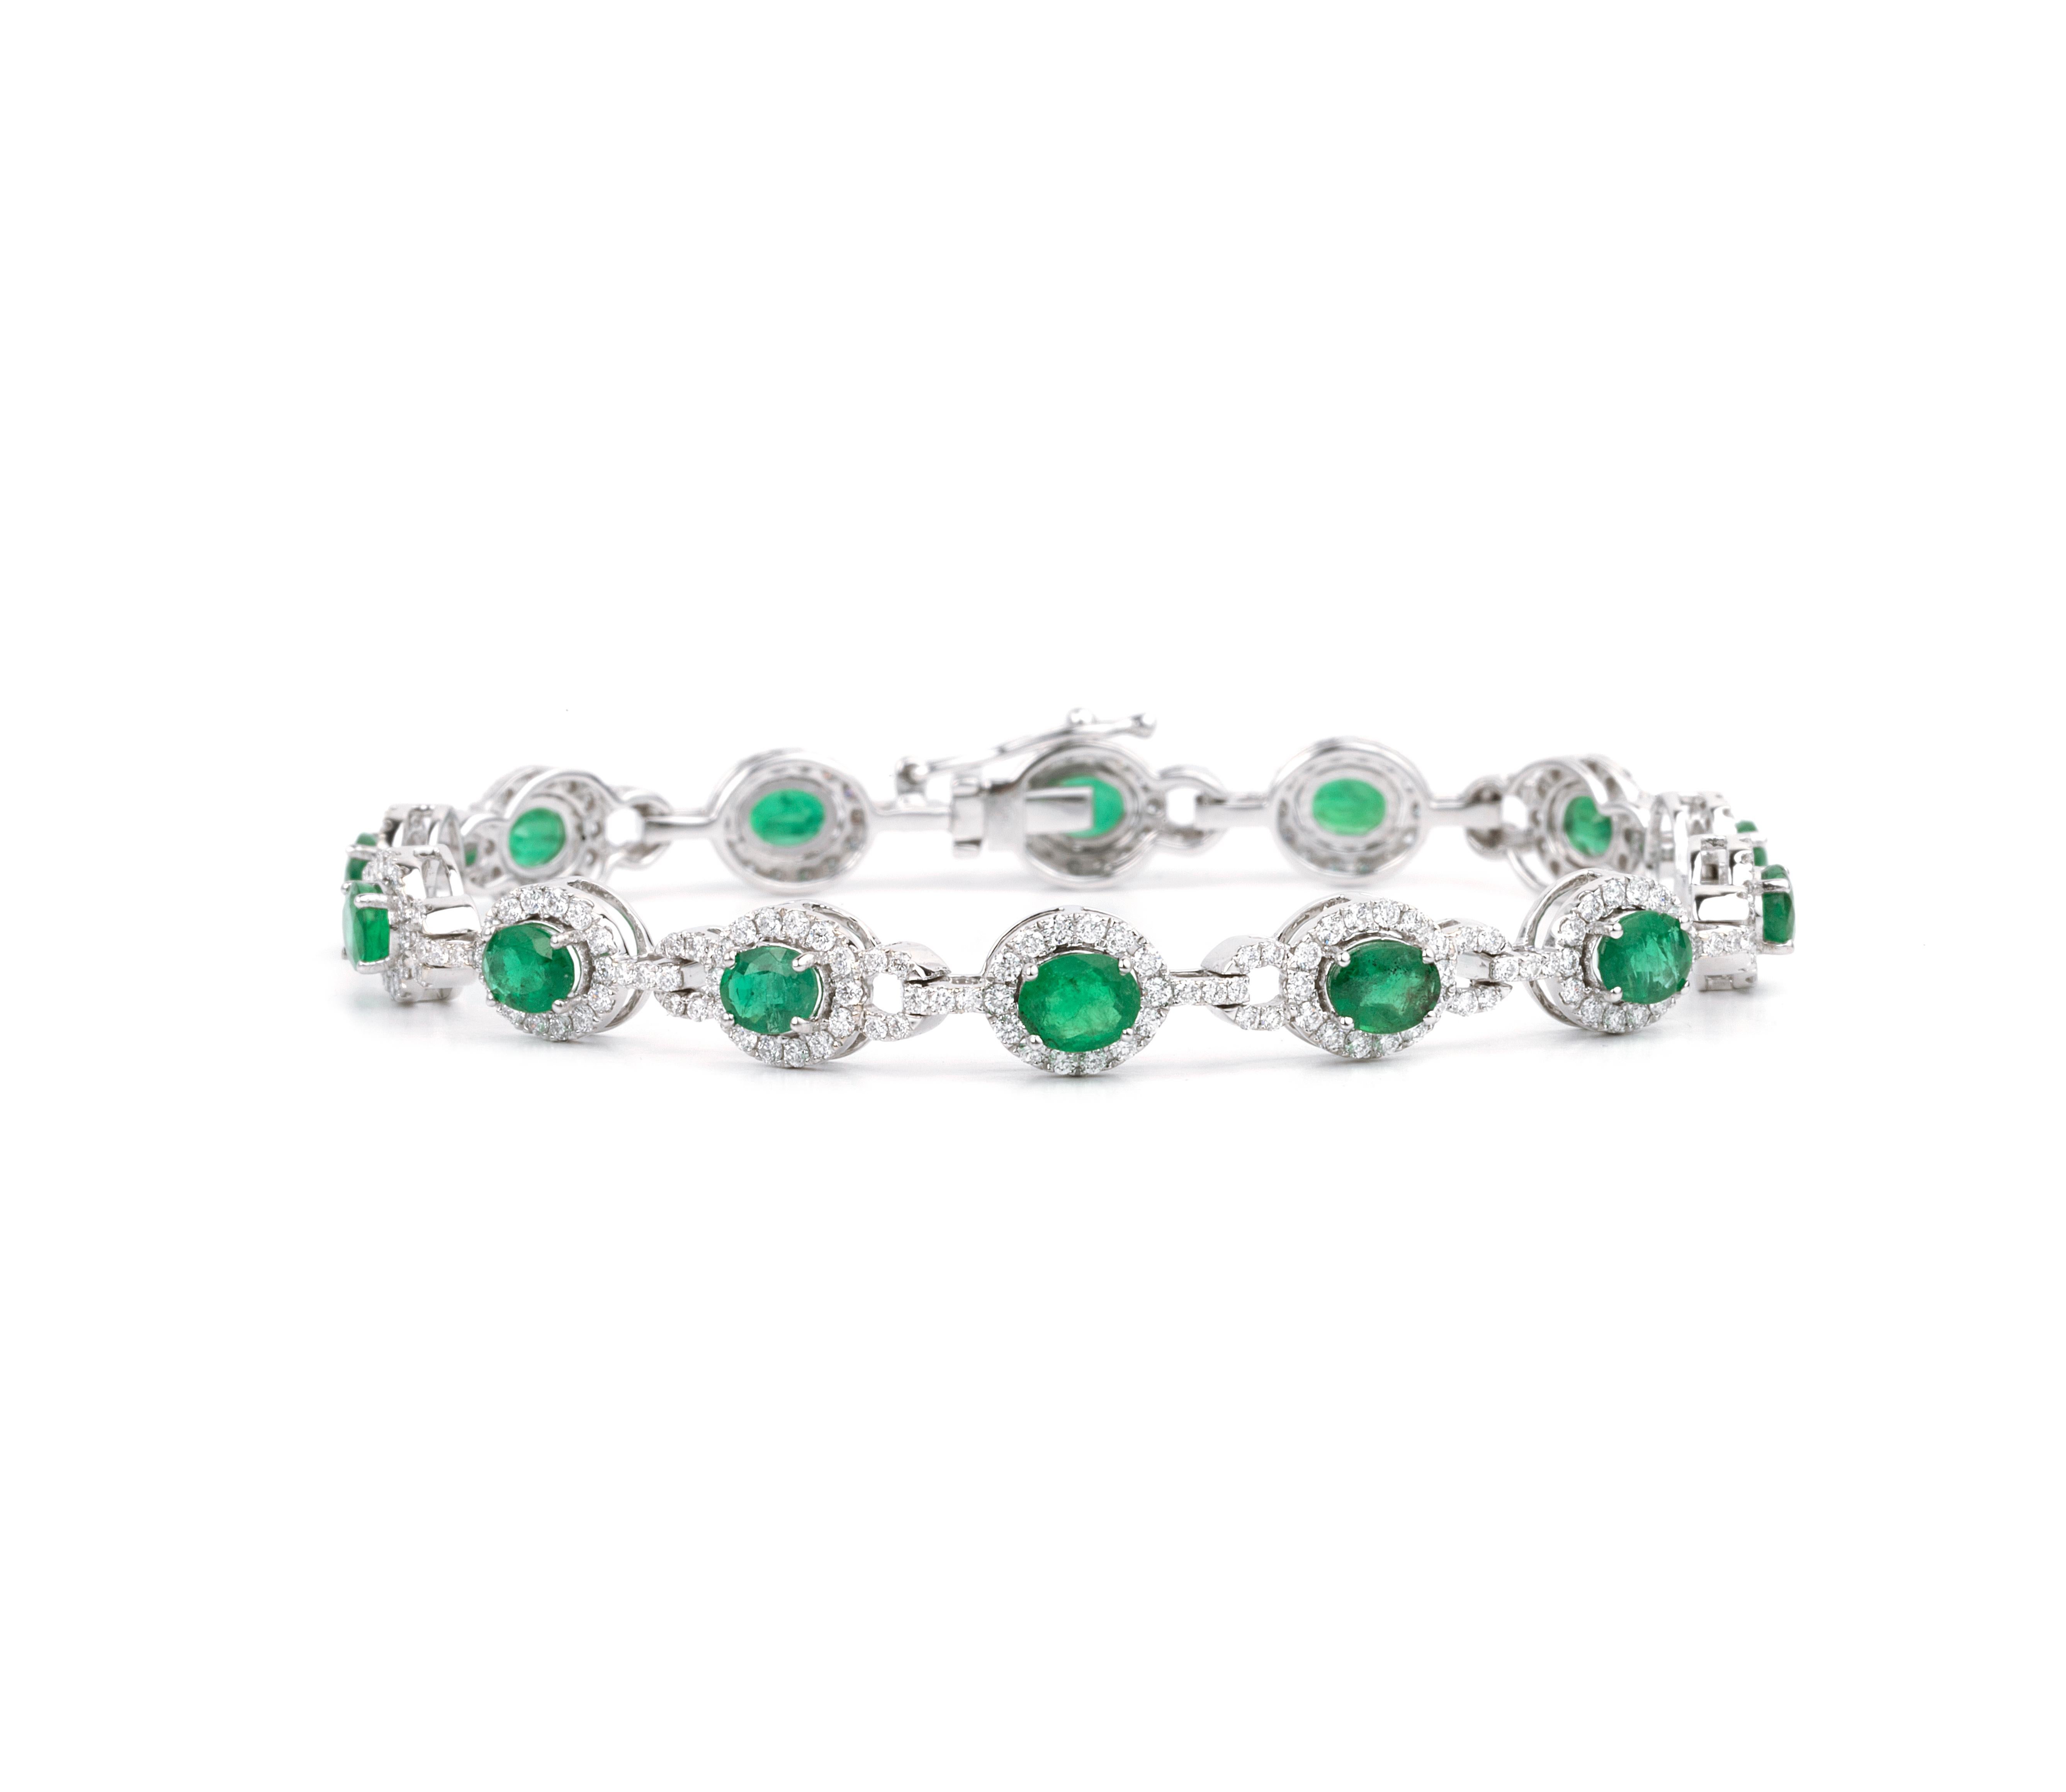 Exceptional 5 Ctw Oval Cut Natural Emerald Bracelet with diamond 18k White Gold

✤ 𝐃𝐞𝐭𝐚𝐢𝐥𝐬
↦ Emerald : 5 carats
✤ Diamond
↦ Color: F G
↦ Clarity: VS 
↦ Carat Weight: 2 TCW
↦ Making Process: Handmade - Crafted by our experienced team
↦ Type: